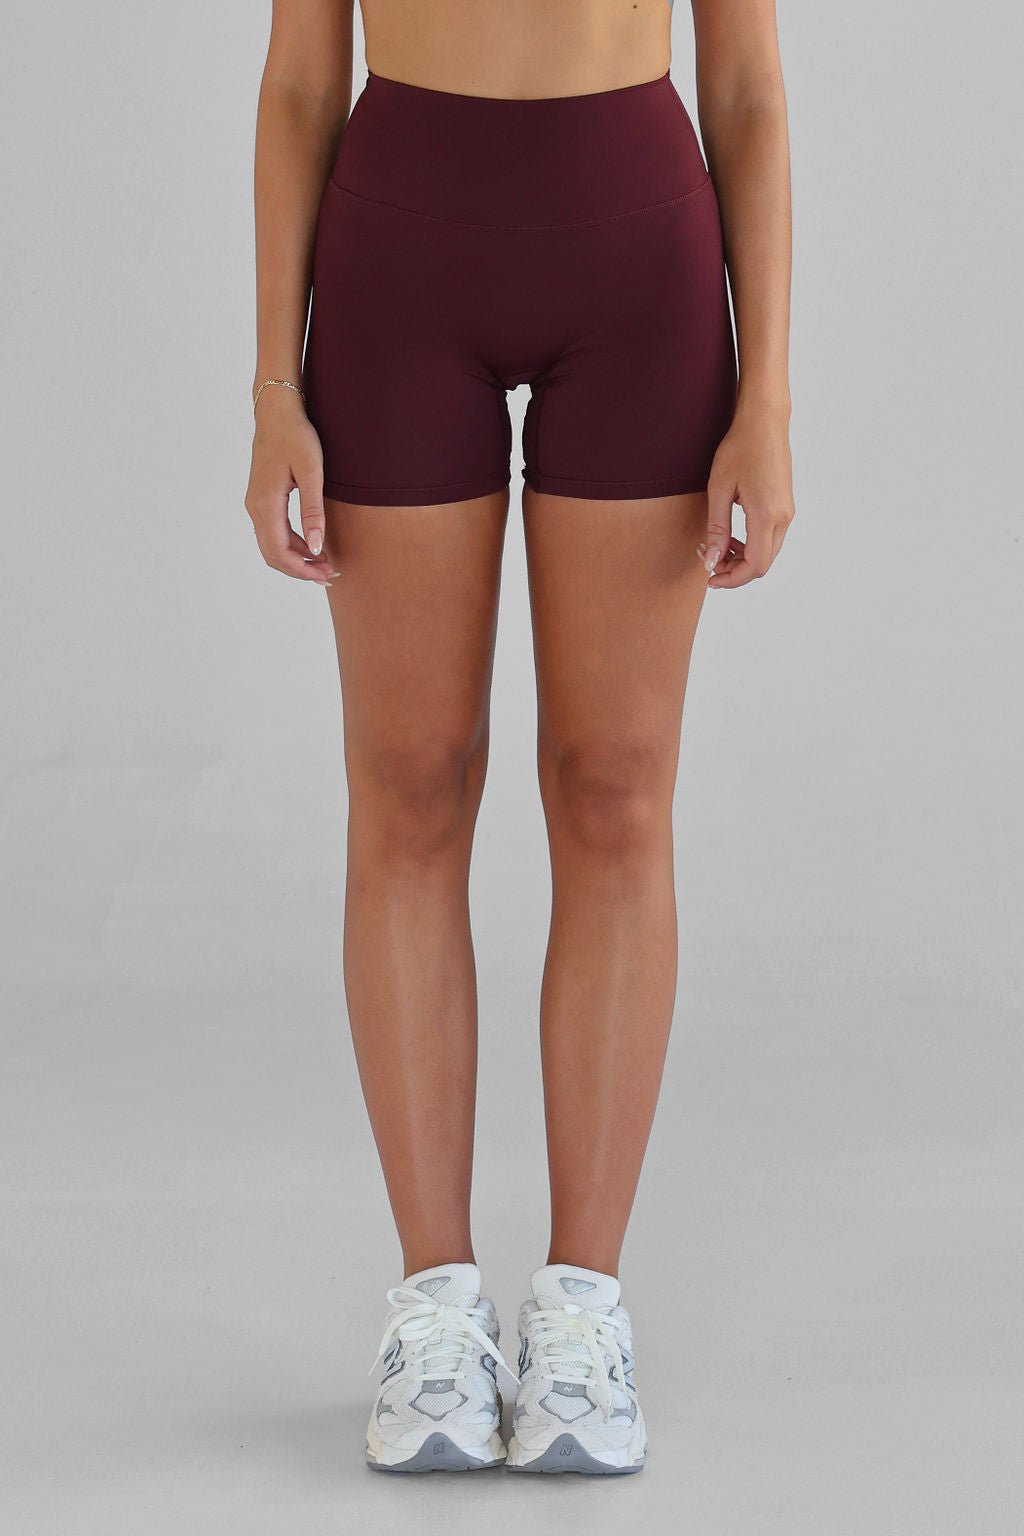 SCULPT Bike Shorts - Cherry Cola SHIPPING FROM 12/02 - LEELO ACTIVE